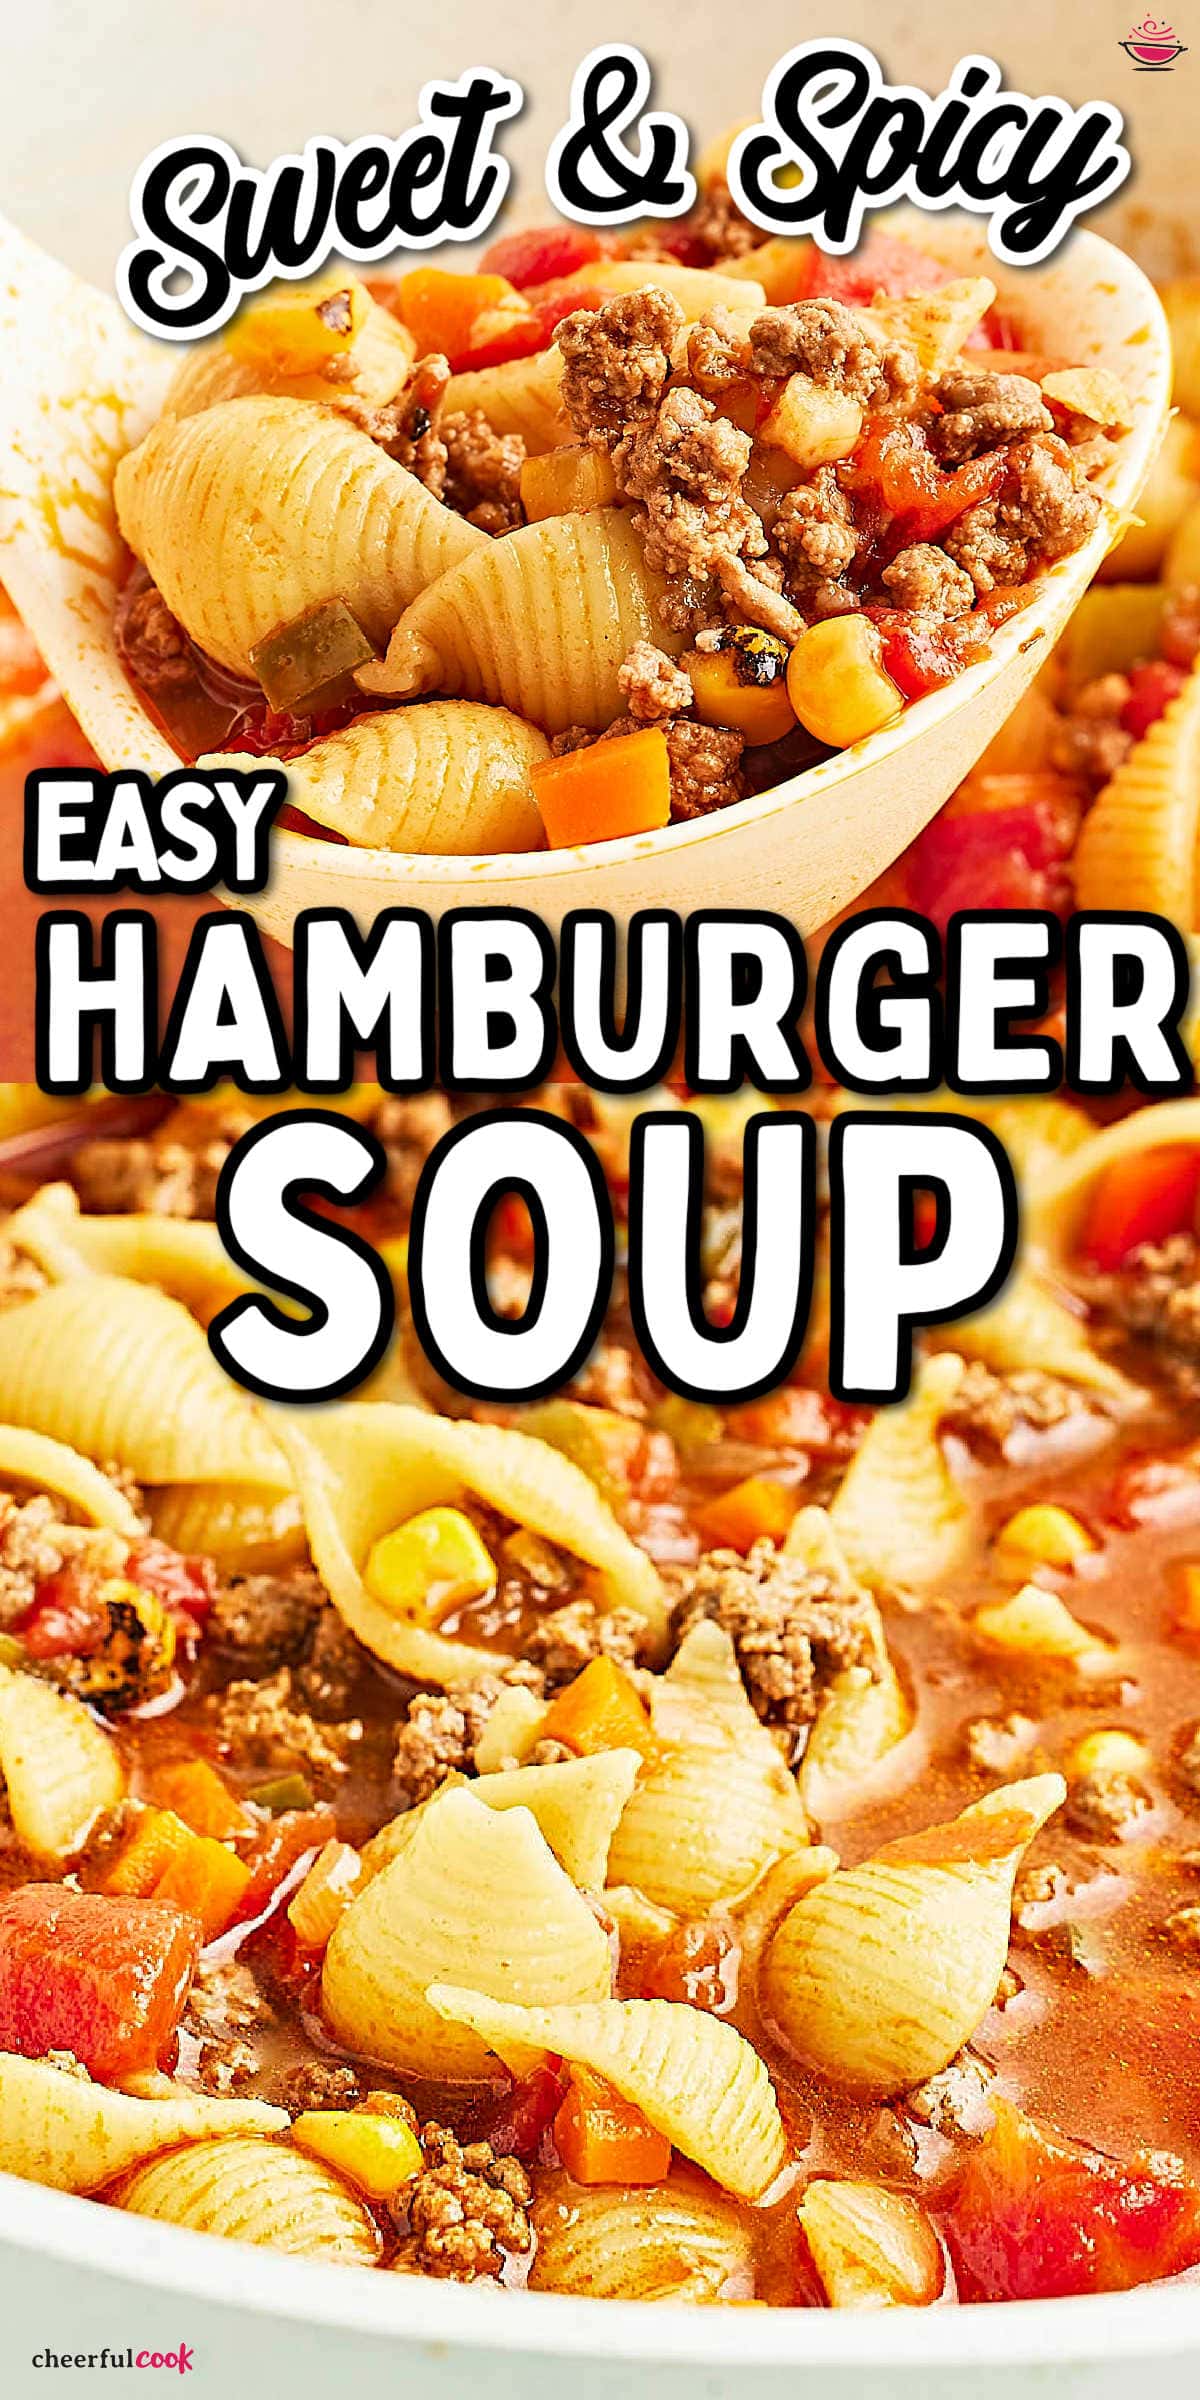 Looking for an easy and hearty meal? Try our Sweet & Spicy Hamburger Soup! This simple, flavorful recipe is sure to become a favorite. Perfect for weeknight dinners and great for leftovers! 🍲 #cheerfulcook #HamburgerSoup #SoupRecipes #ComfortFood #EasyRecipes #groundbeefrecipe #groundbeefsoup  via @cheerfulcook